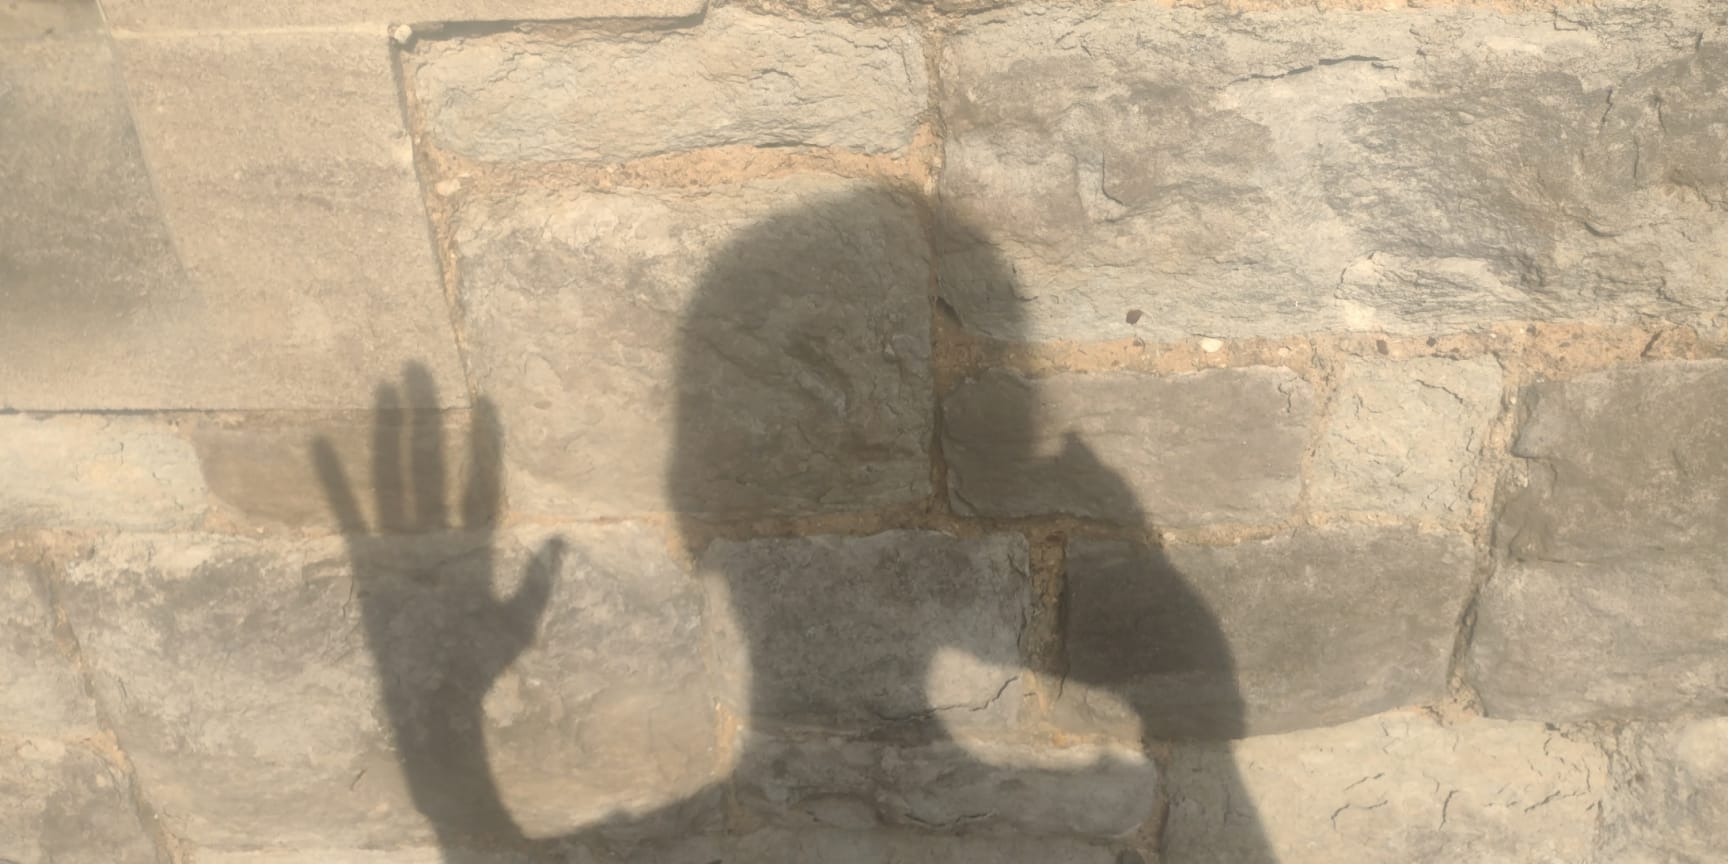 A shadow of a head and hand on a pavement